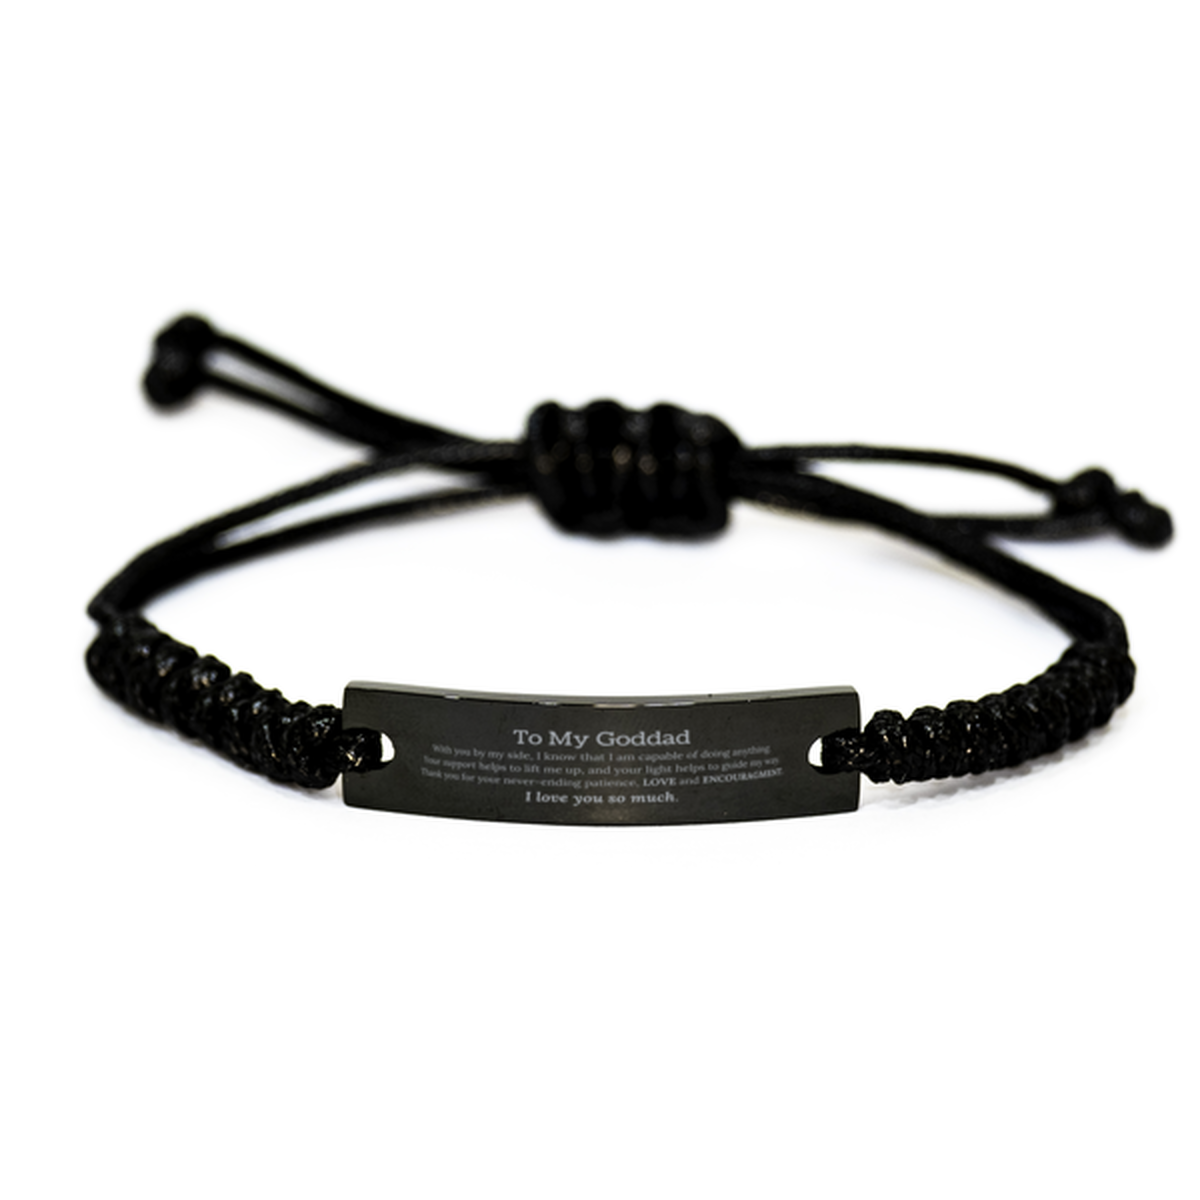 Appreciation Goddad Black Rope Bracelet Gifts, To My Goddad Birthday Christmas Wedding Keepsake Gifts for Goddad With you by my side, I know that I am capable of doing anything. I love you so much